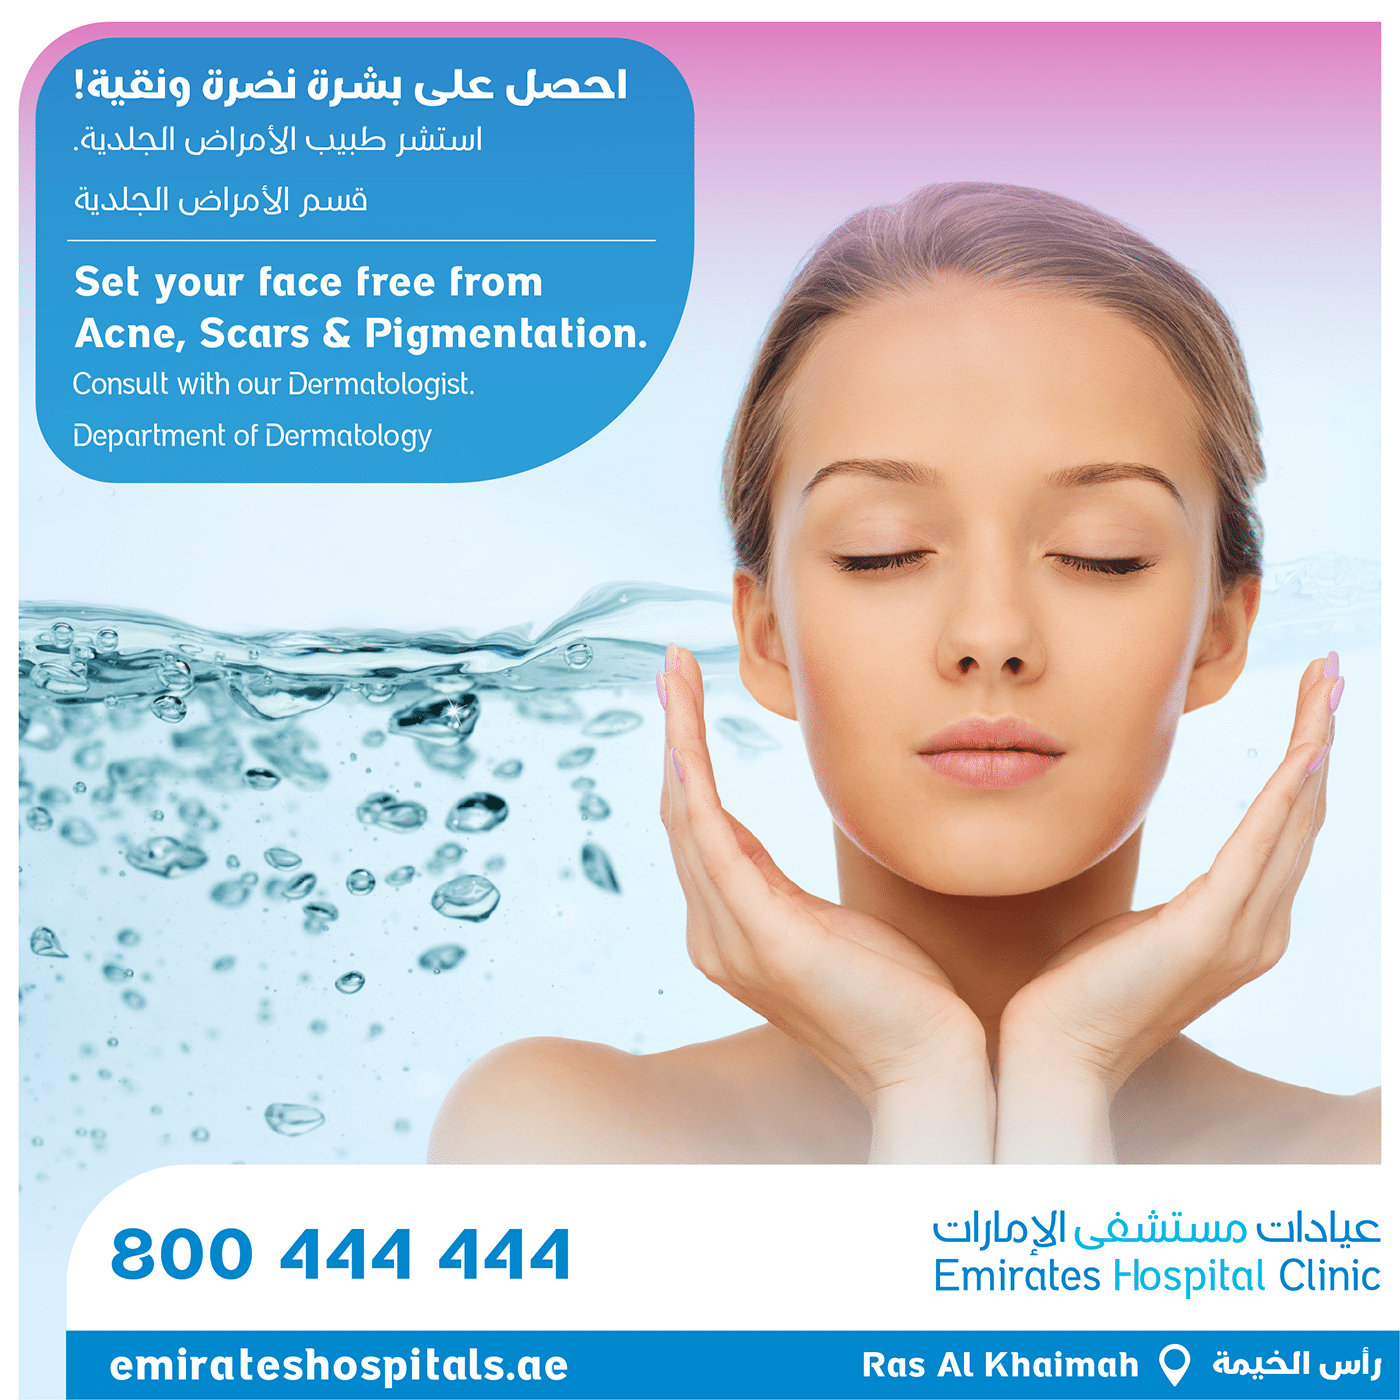 Set your face free from Acne, Scars & pigmentation